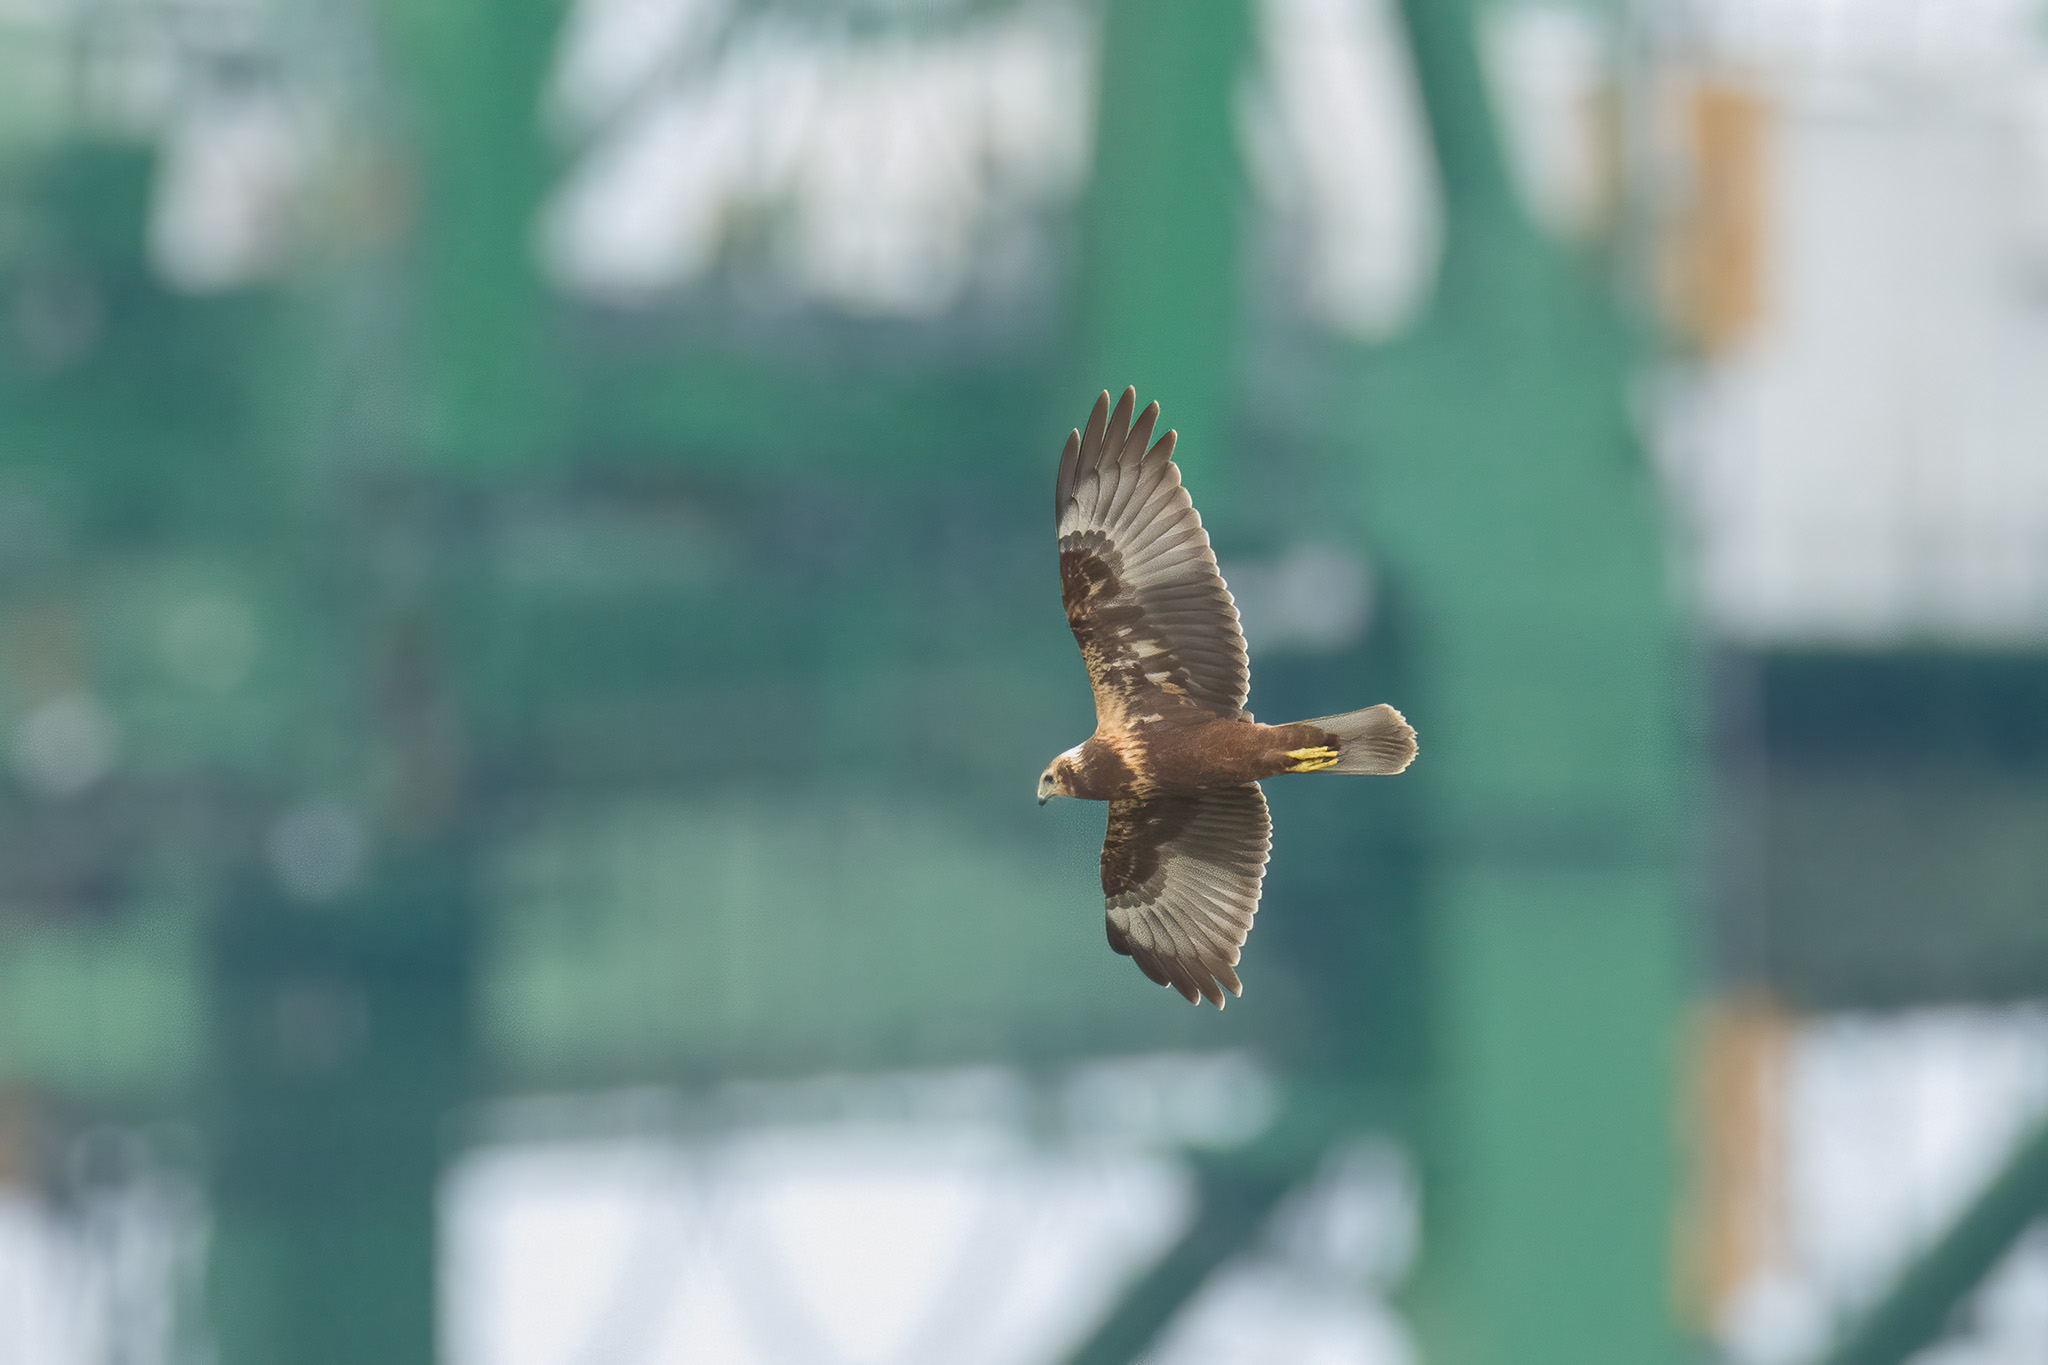 Eastern Marsh Harrier at Tuas South on 27 Oct 2022. Photo credit: Francis Yap